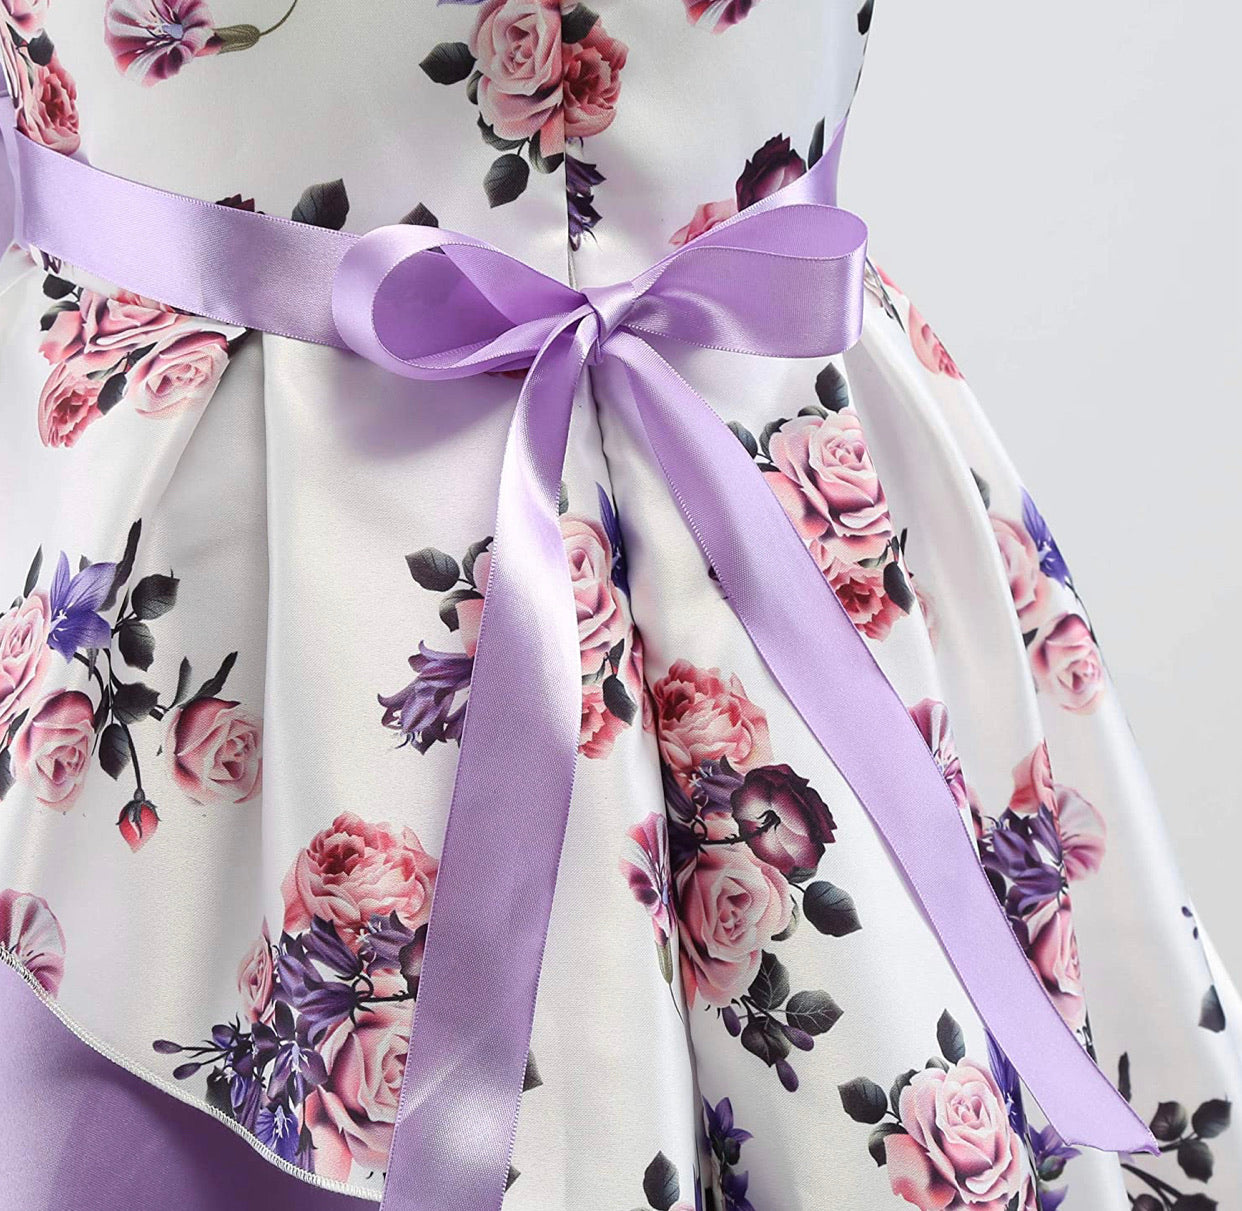 Little Girl’s Formal Floral Print Dress, Sizes 2T - 9 years (Purple)